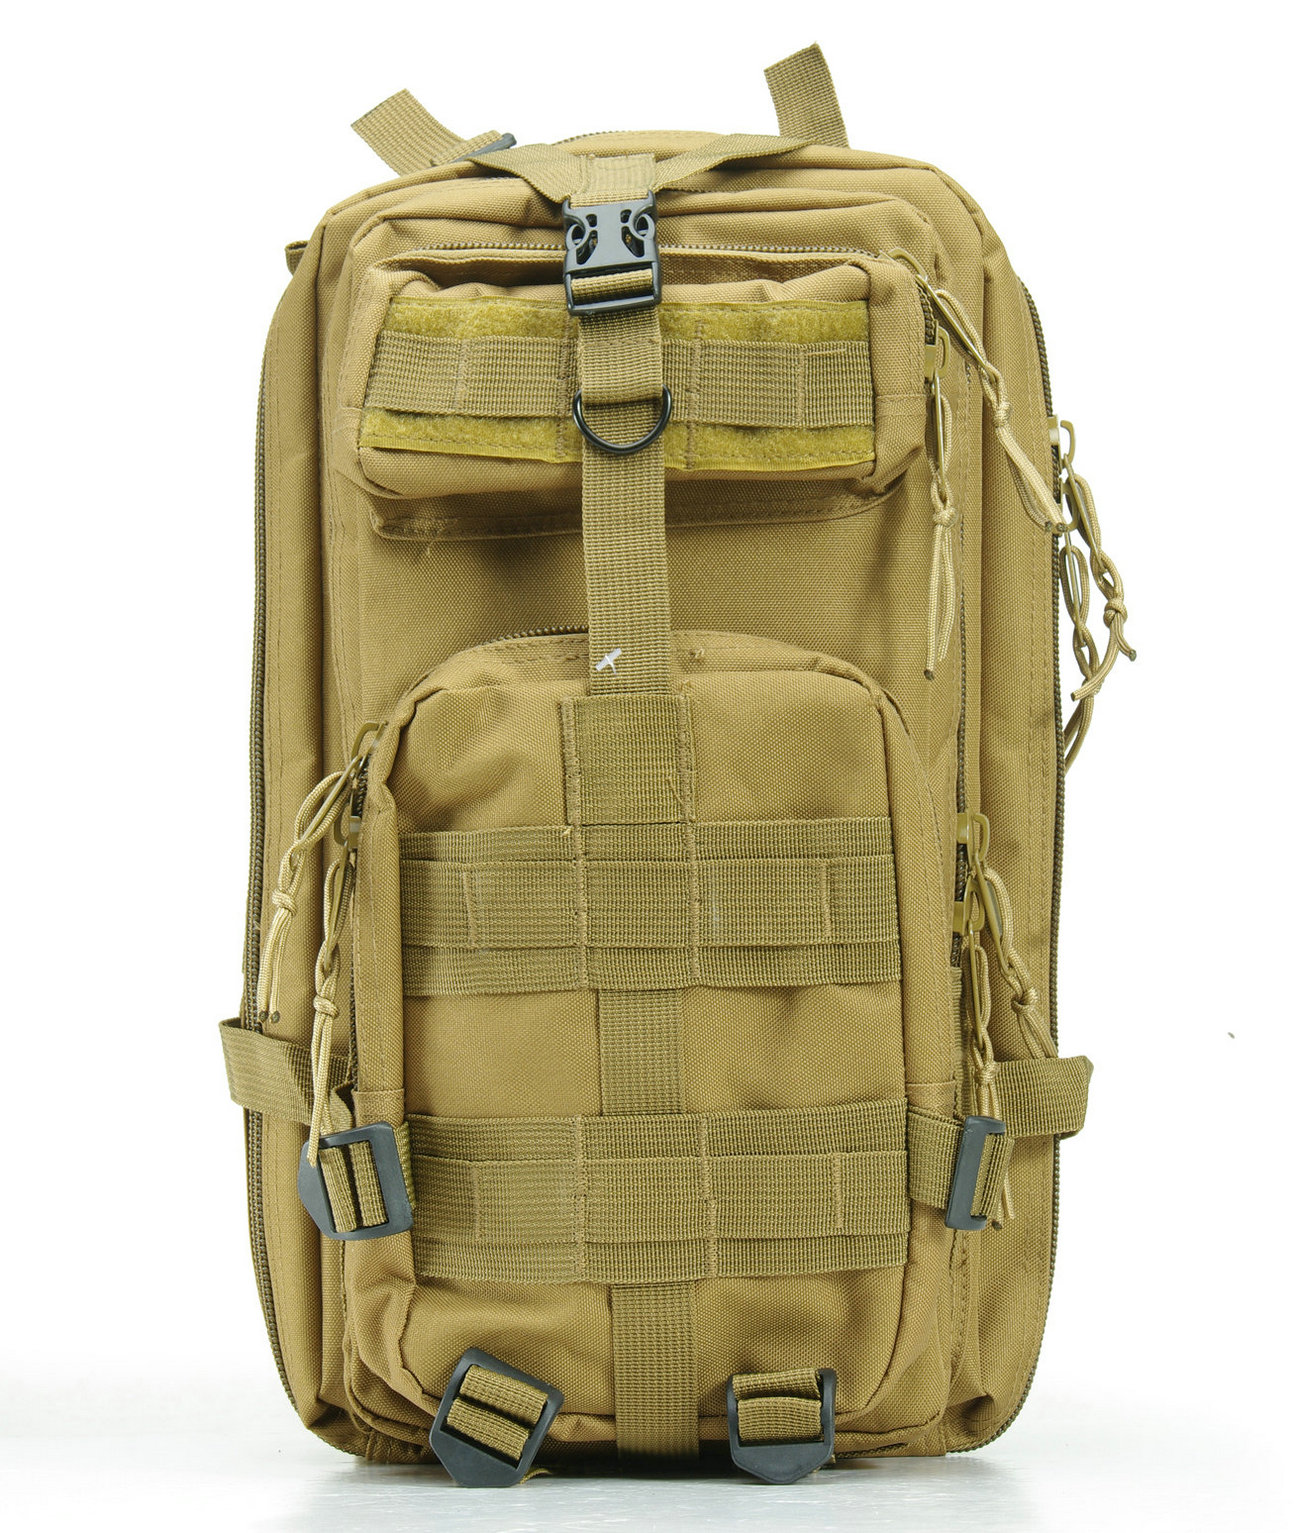 3p-attack-camping-hiking-mountaineering-outdoor-travel-ride-molle-woodland-sustainment-army-backpack-bag-advanced-tactical.jpg